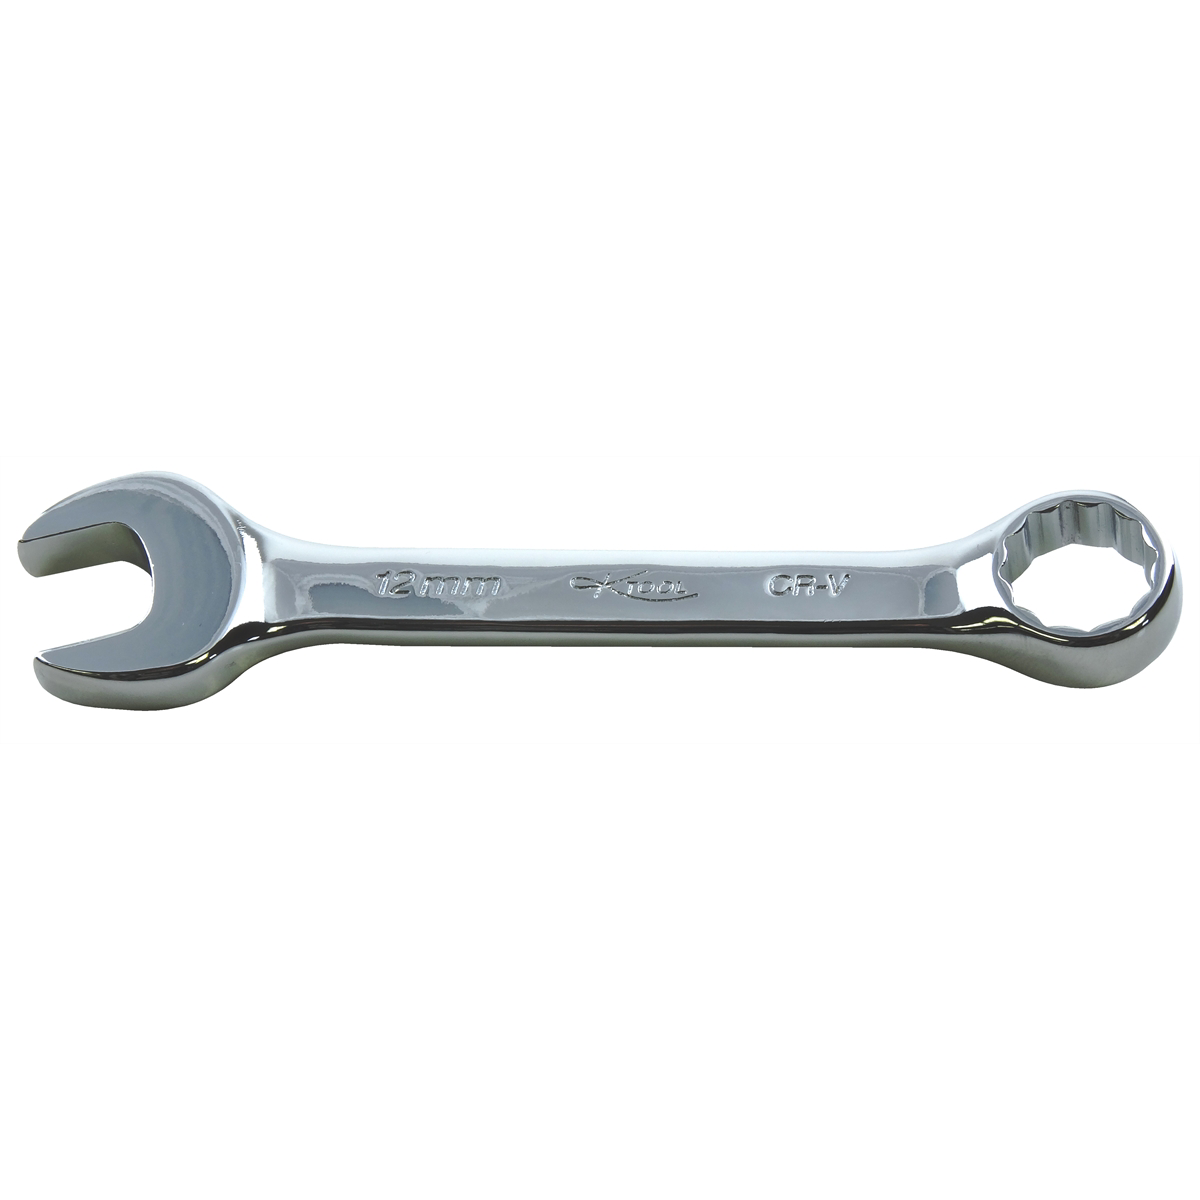 12 Point High Polish Metric Short Combination Wrench 12mm